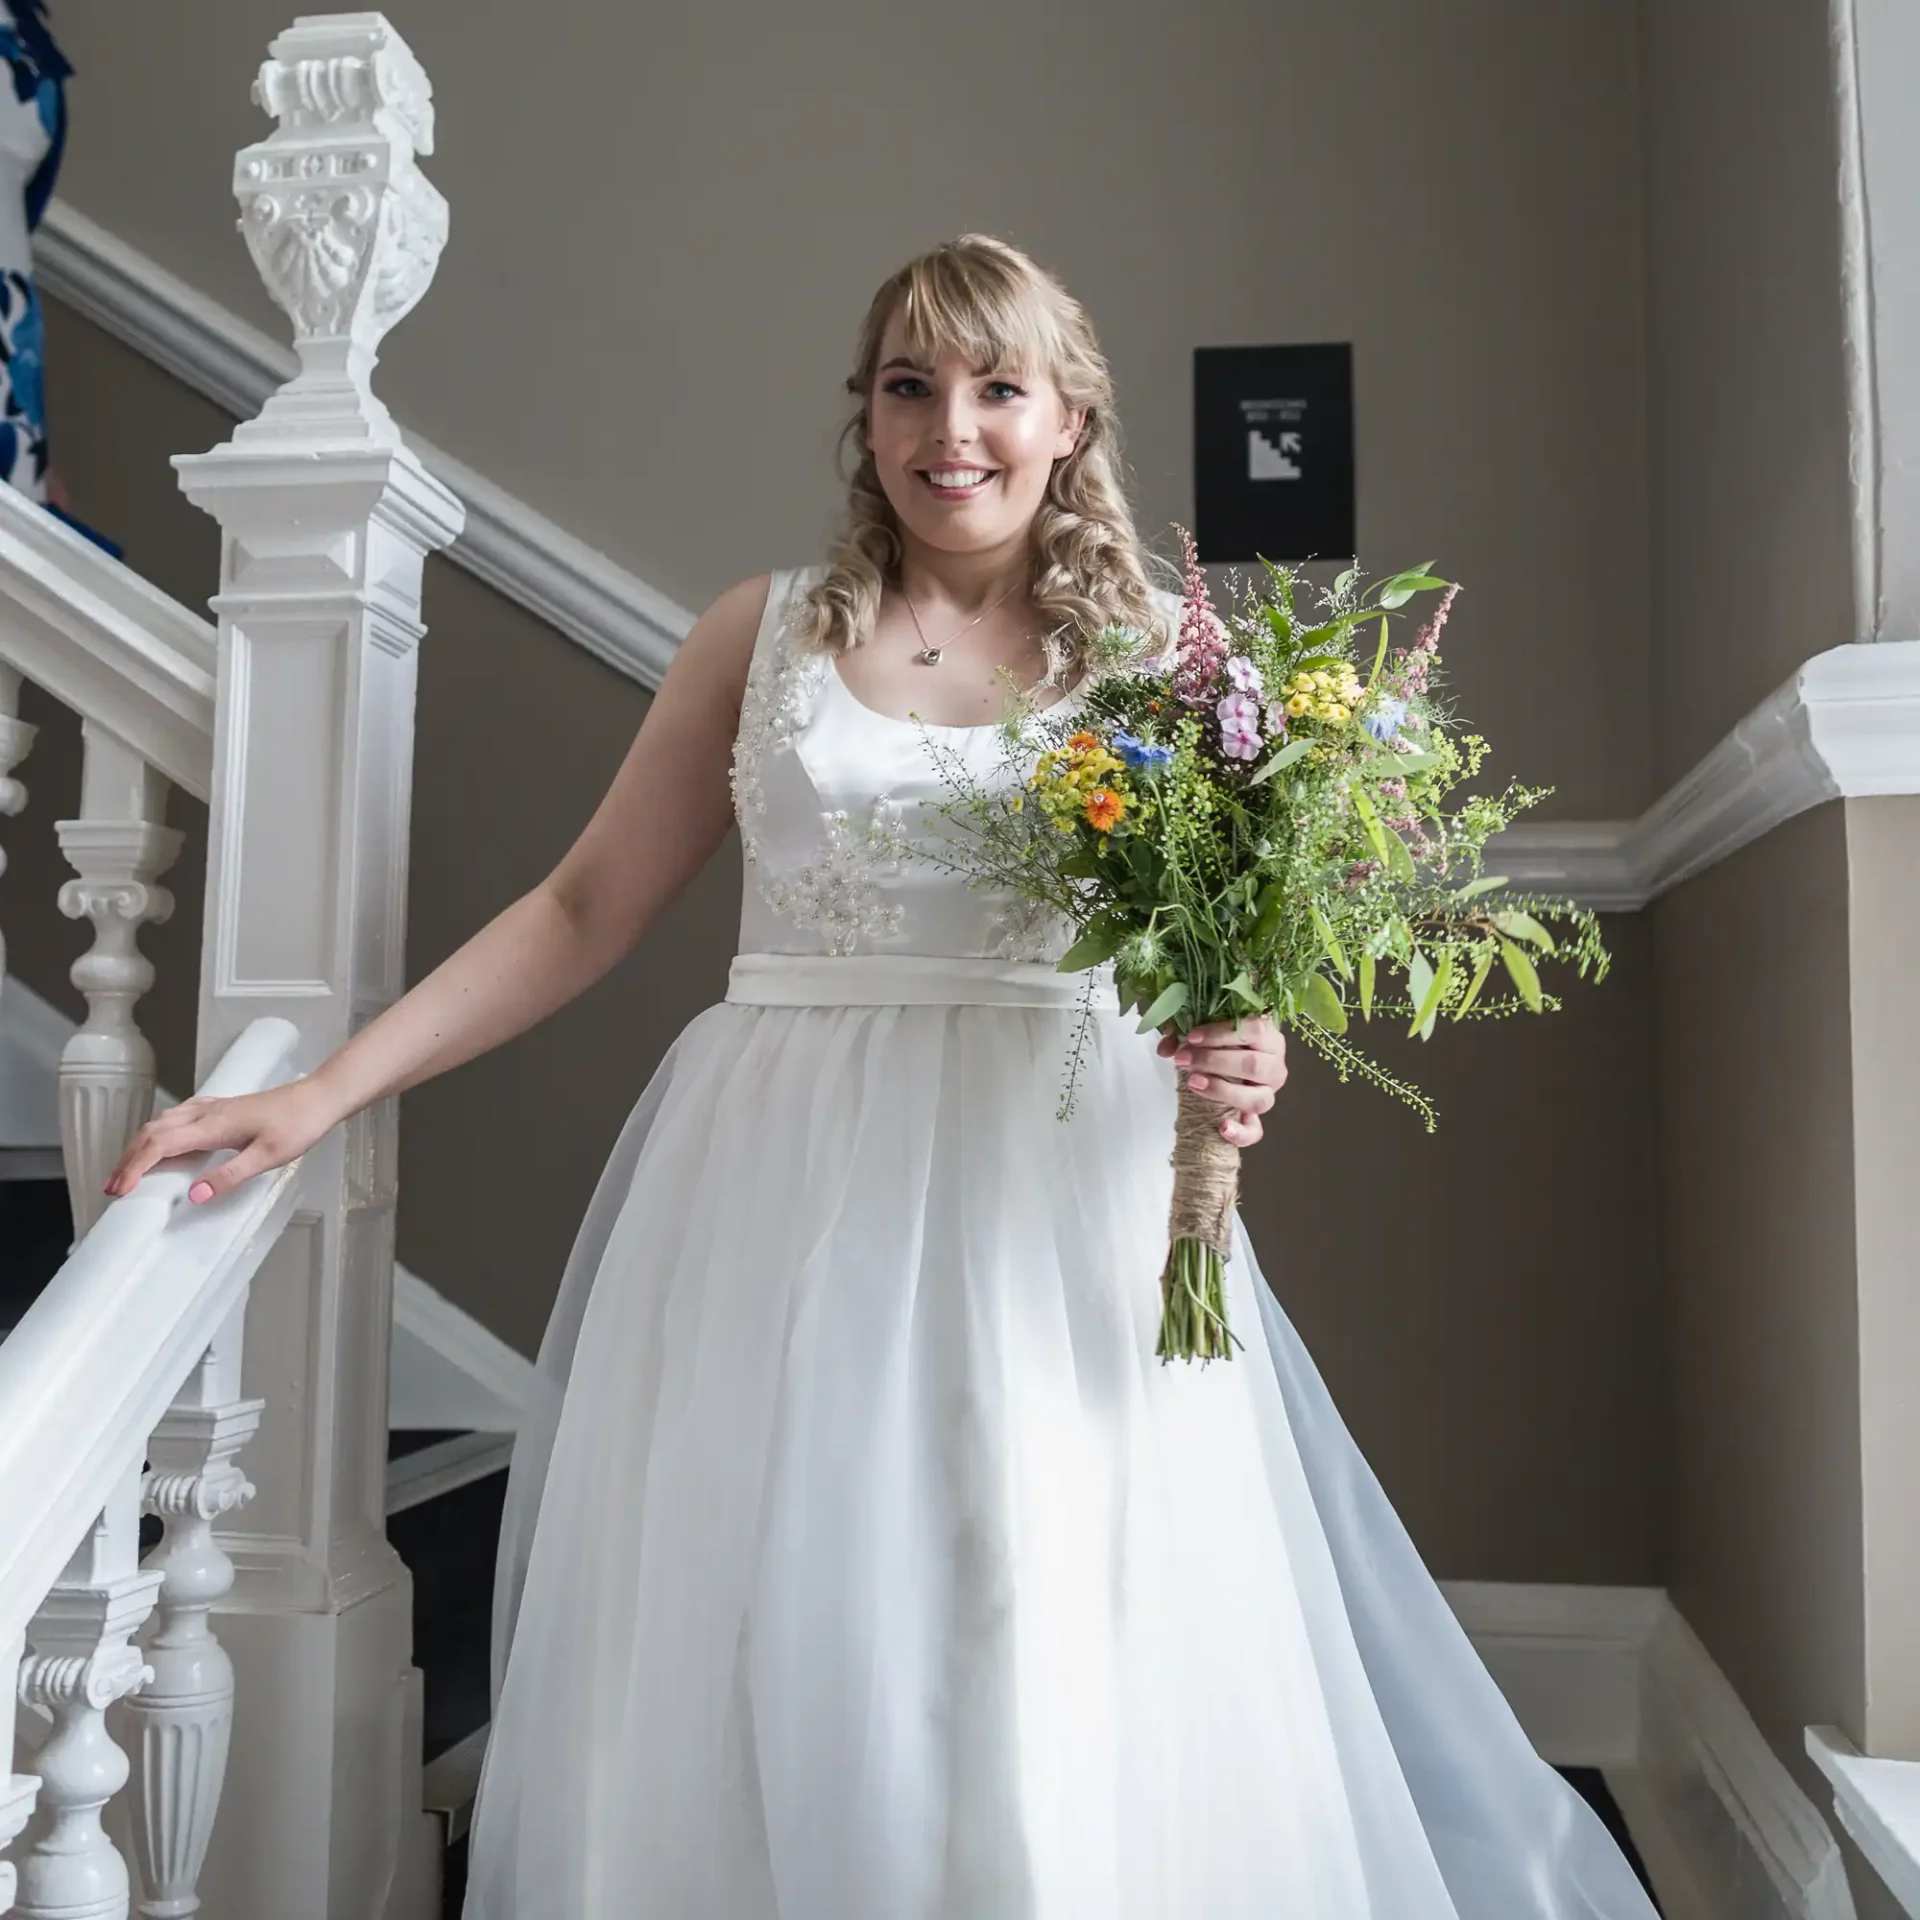 A bride in a white dress smiling, holding a bouquet of wildflowers while standing on a staircase with intricately designed railings.